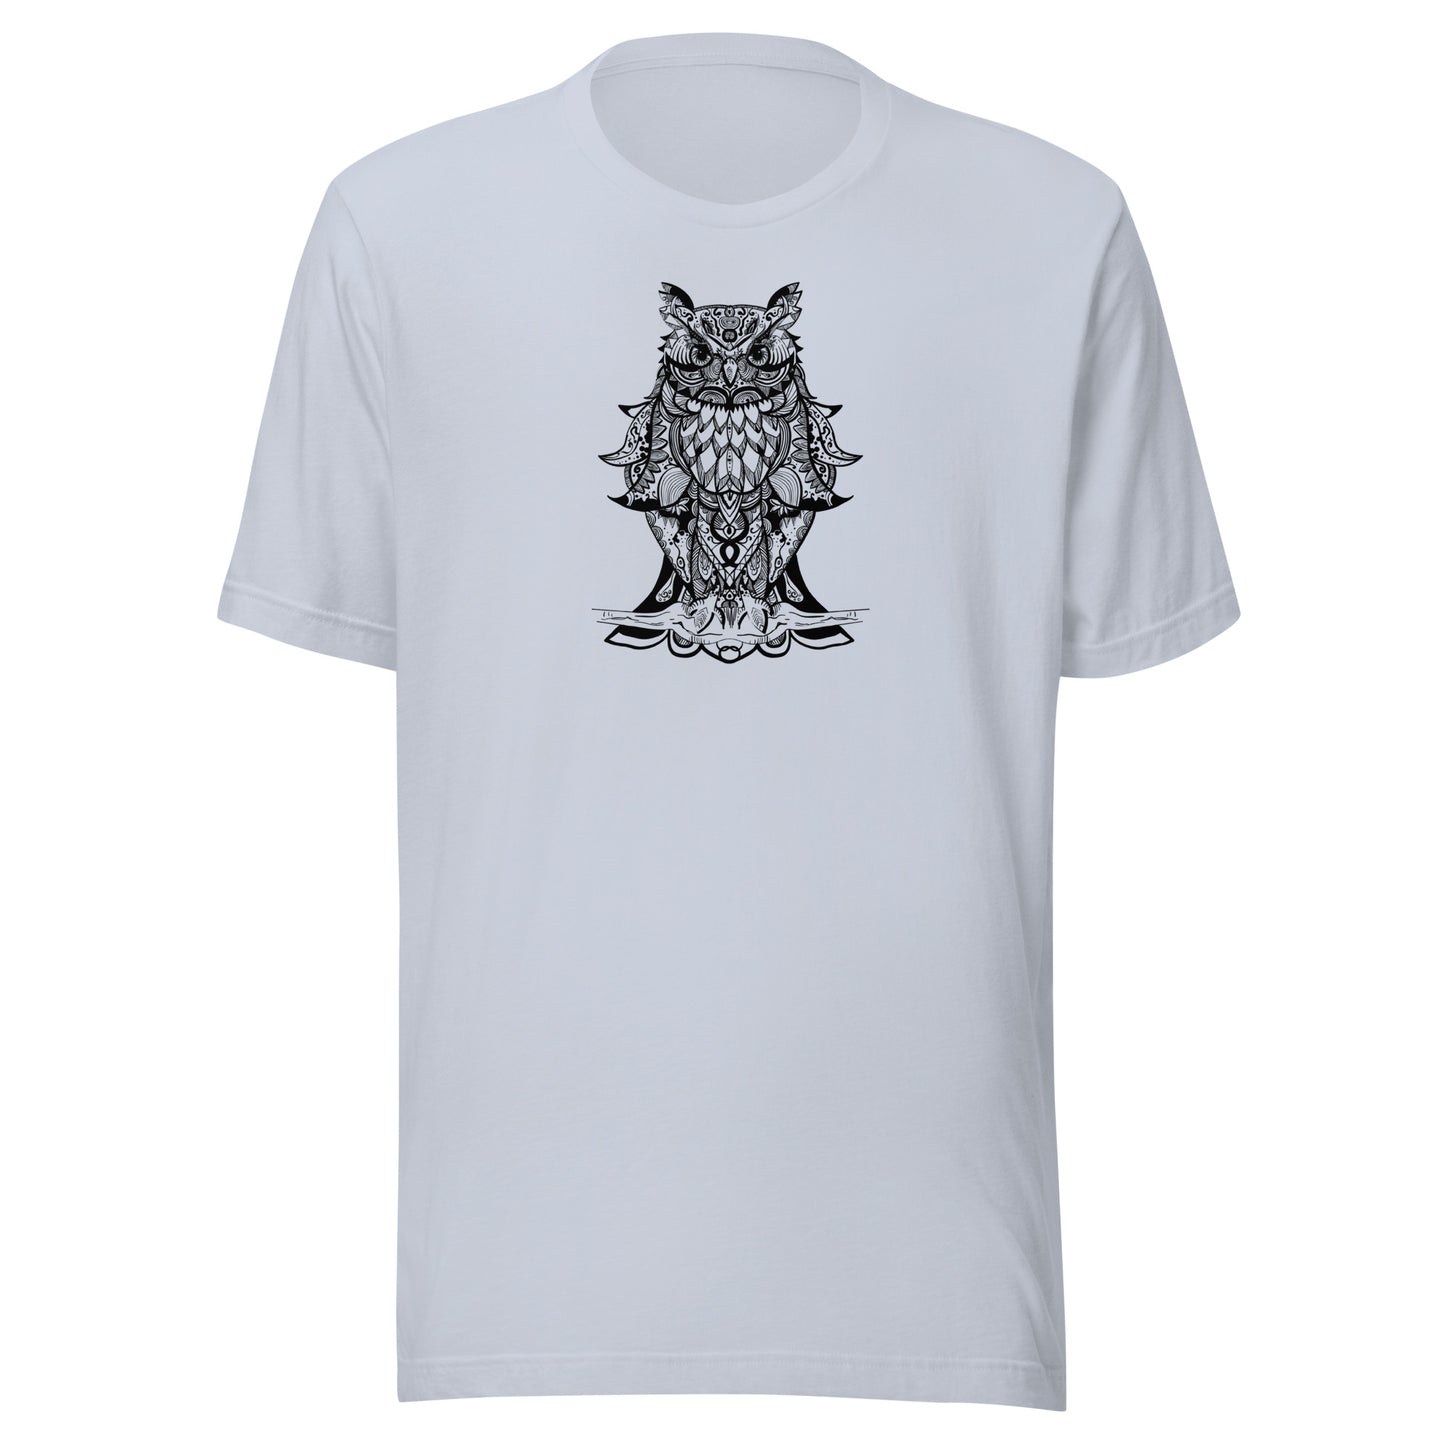 Unisex t-shirt with an owl